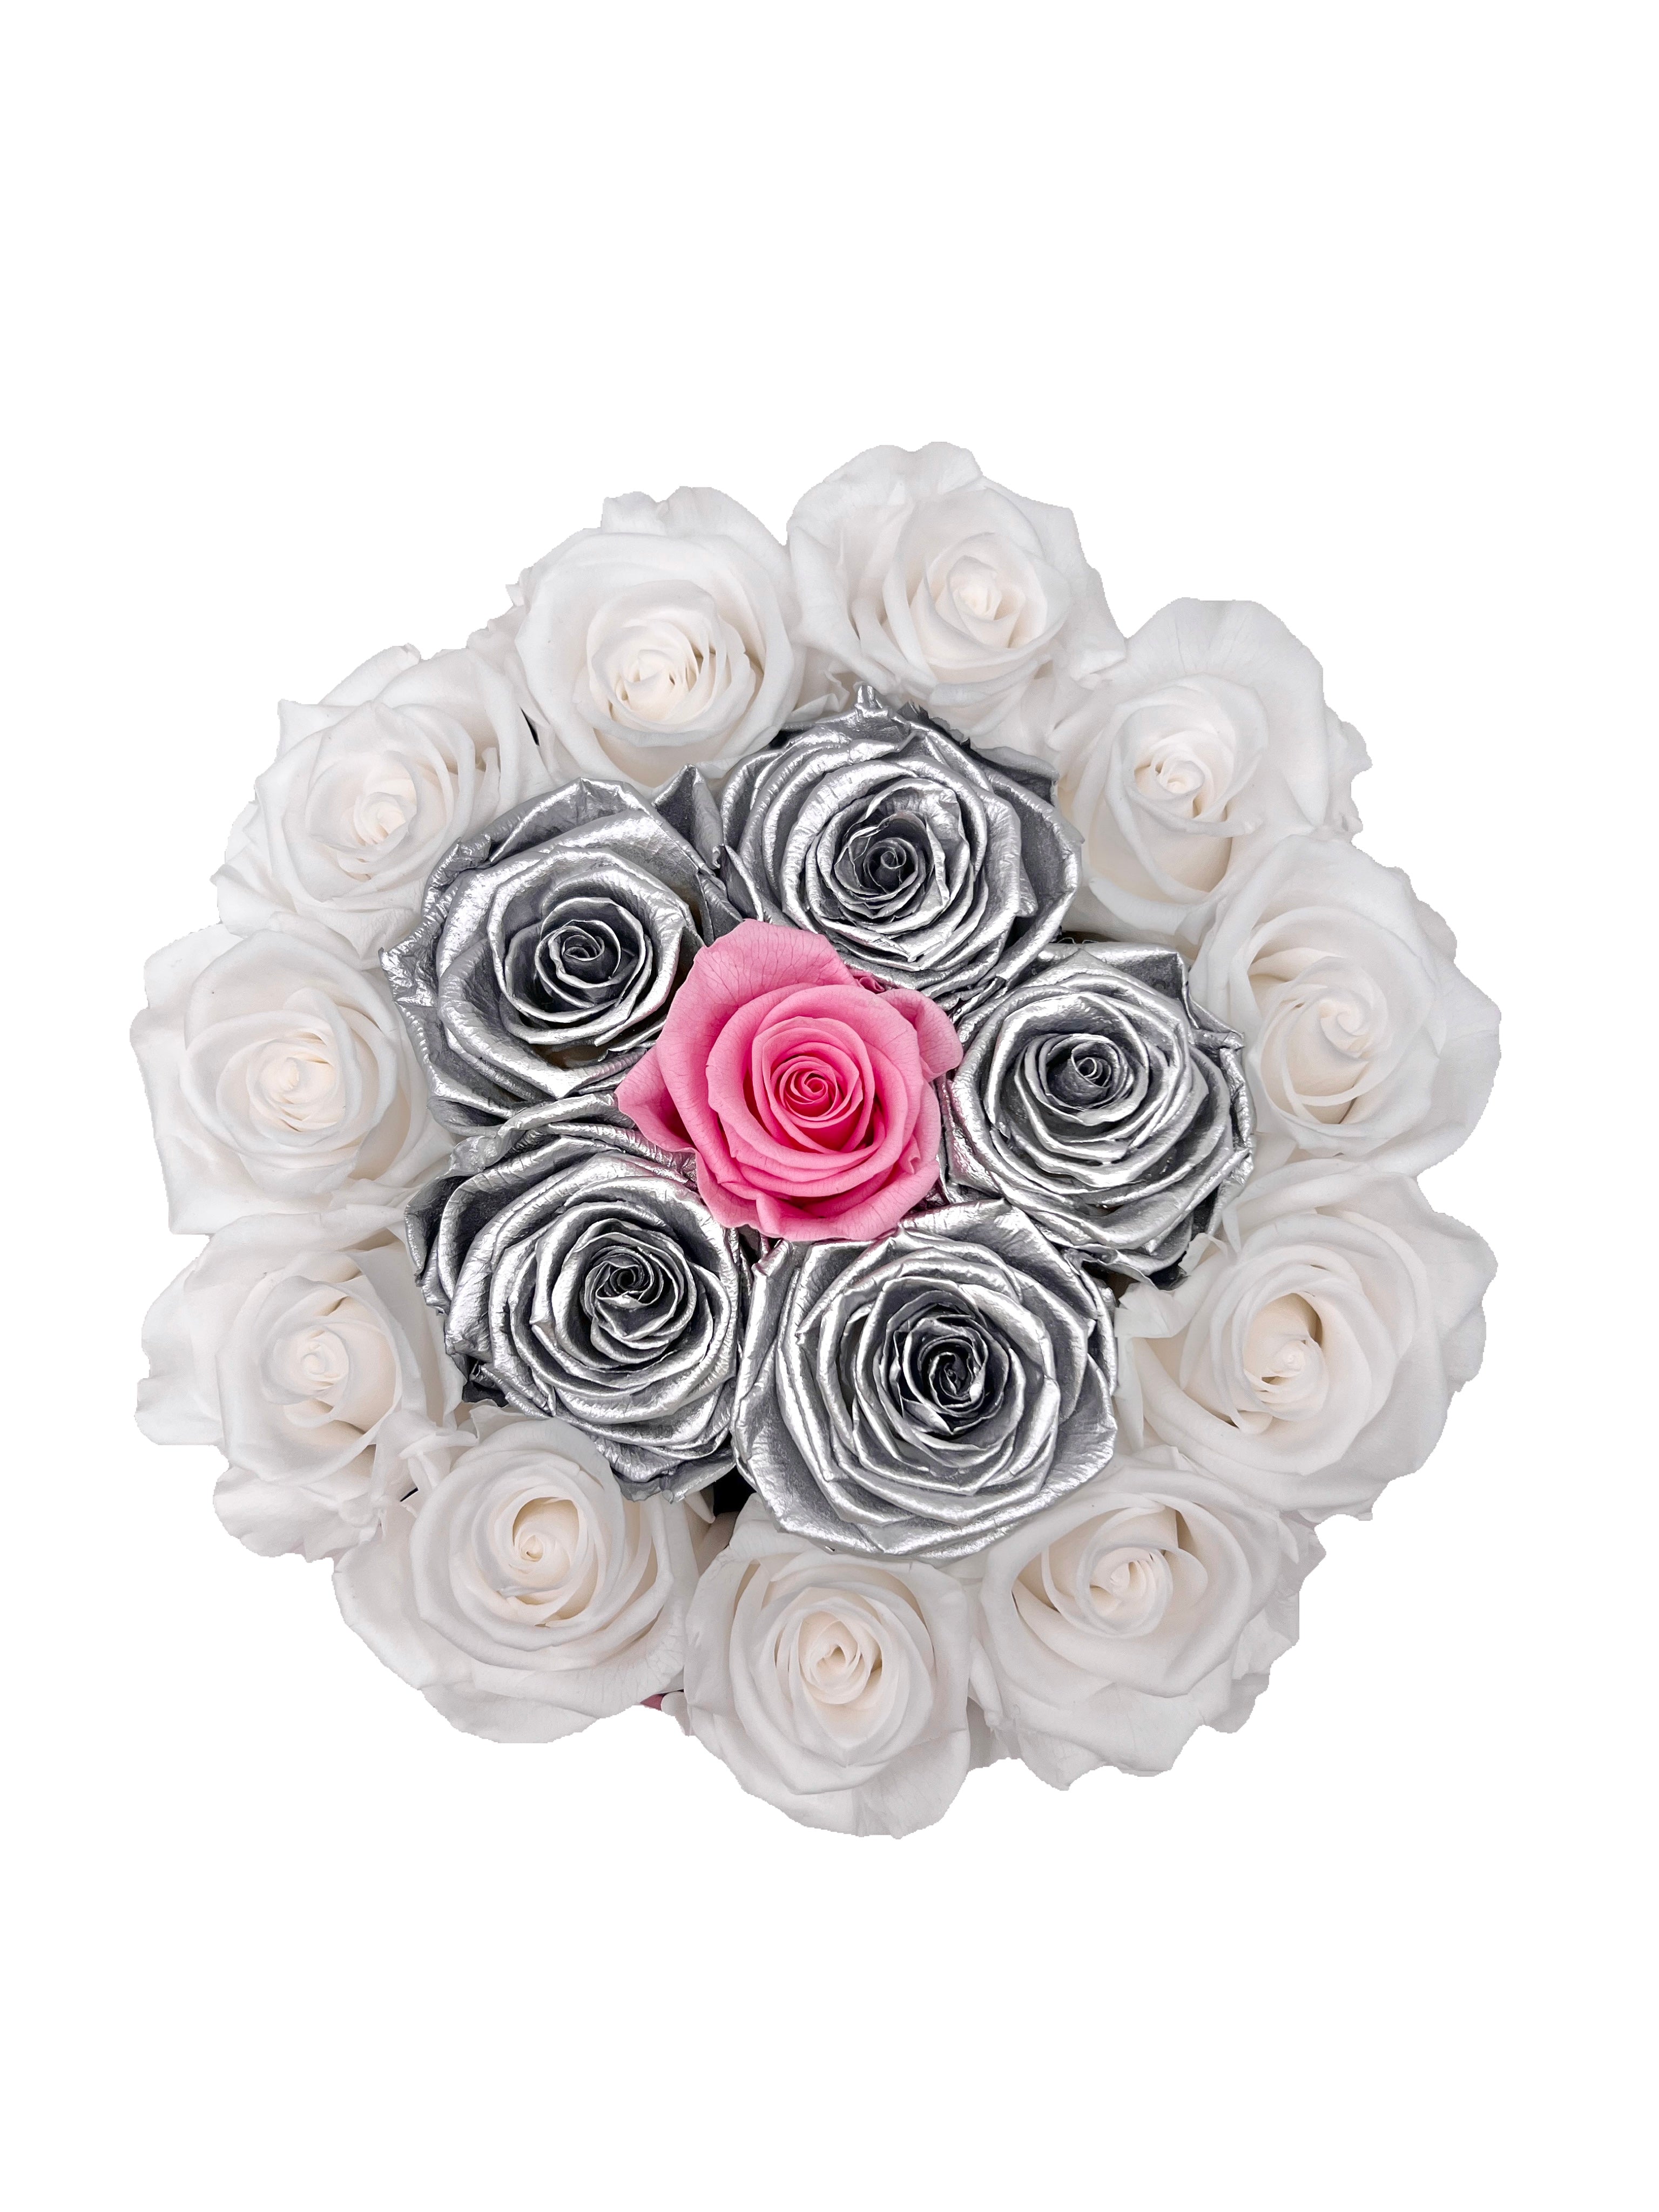 White Preserved Roses with Silver, & 1 Pink Rose - Medium Round Pink Box